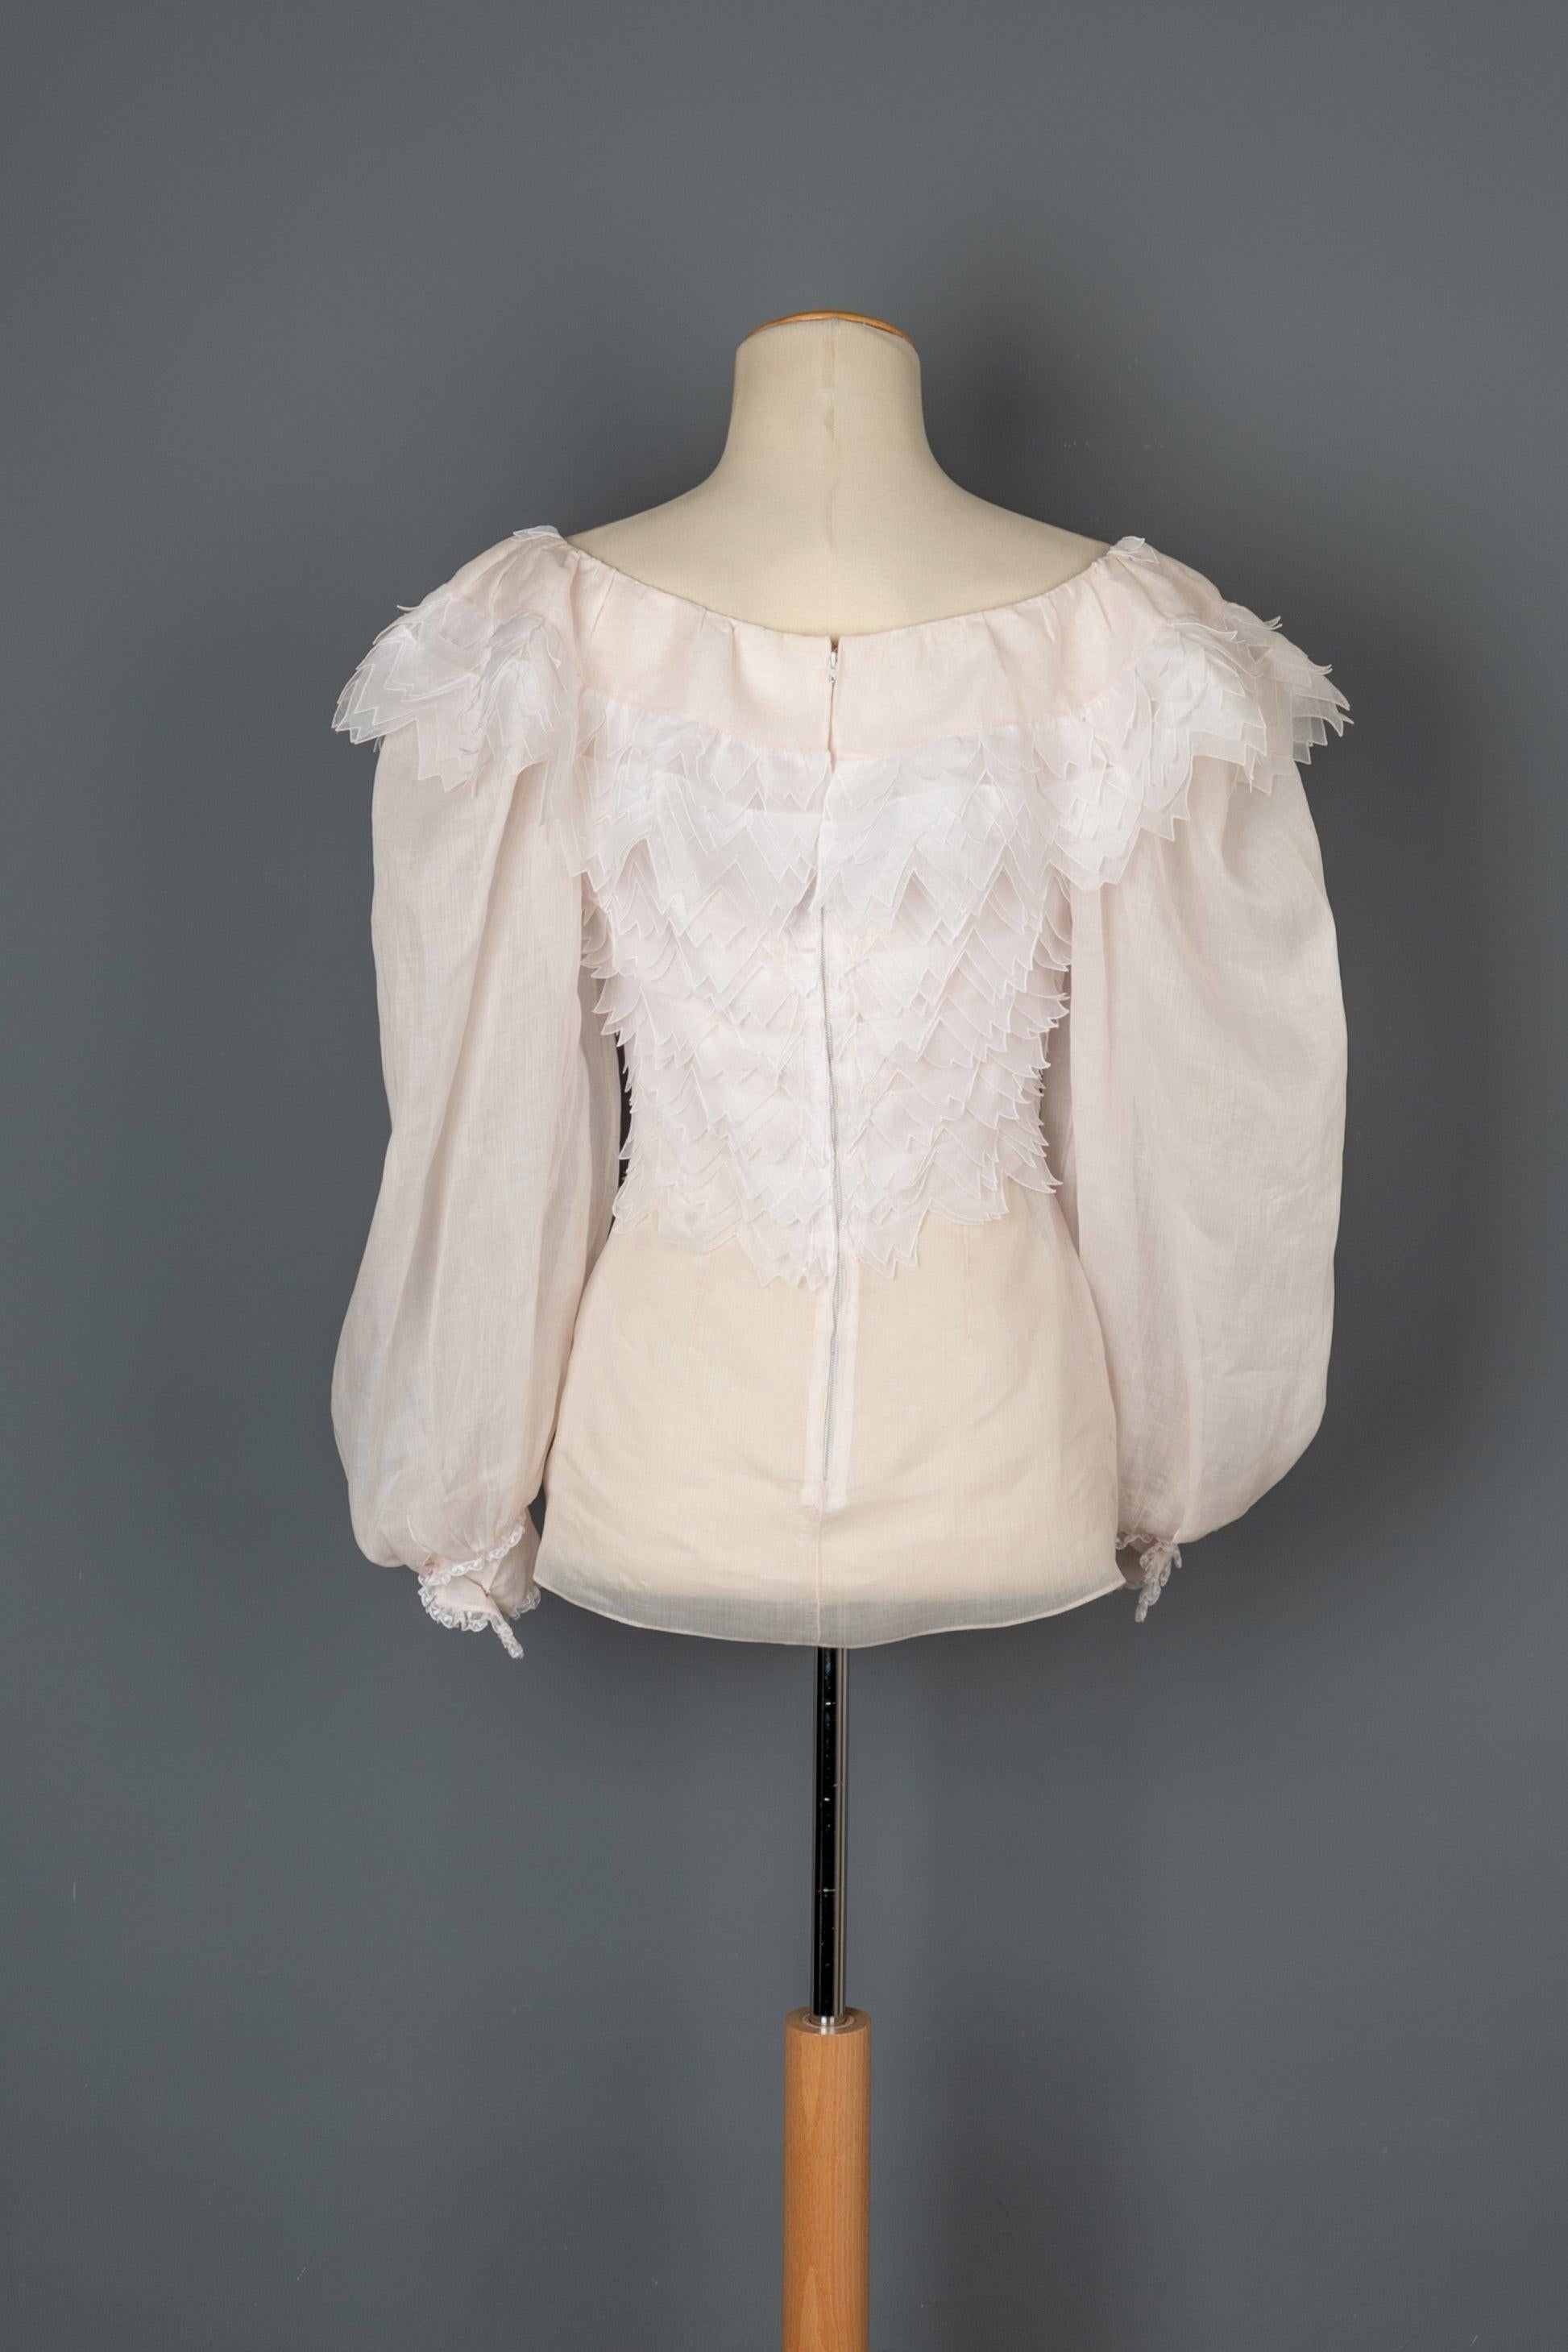 Nina Ricci Flounced Top in White and Pale Pink Tones In Excellent Condition For Sale In SAINT-OUEN-SUR-SEINE, FR